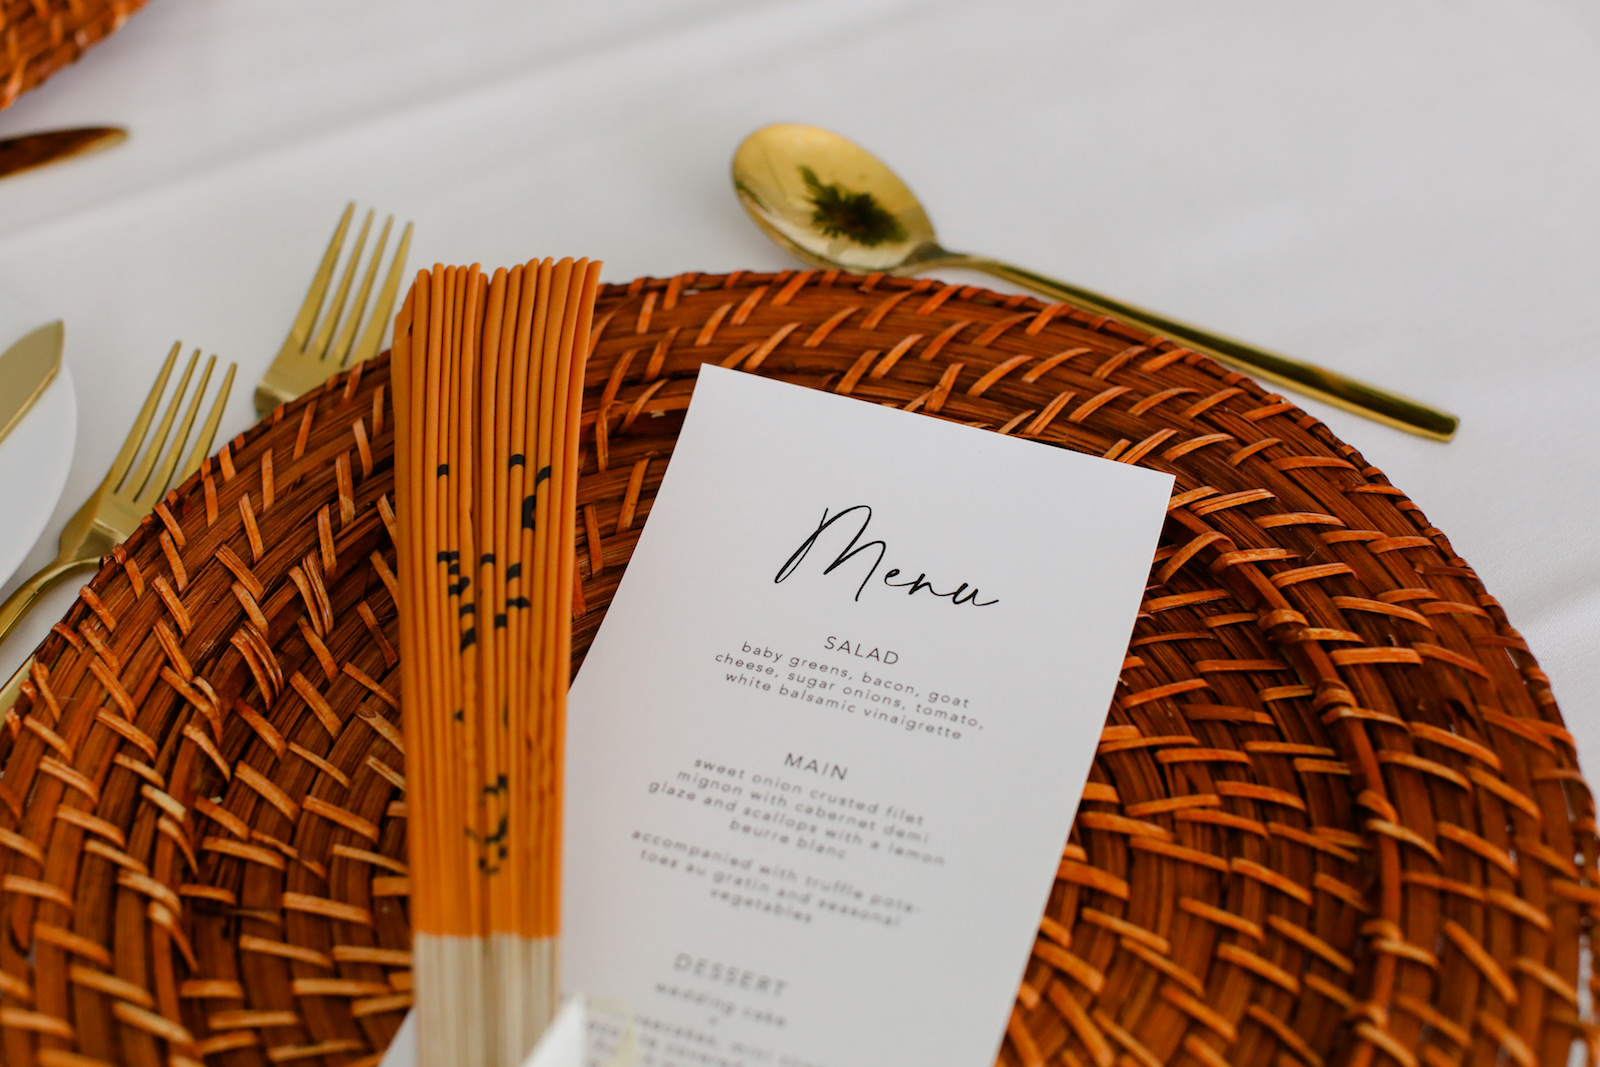 Woven Charger with Gold Flatware with Asian Inspired Fans | Gabro Event Services